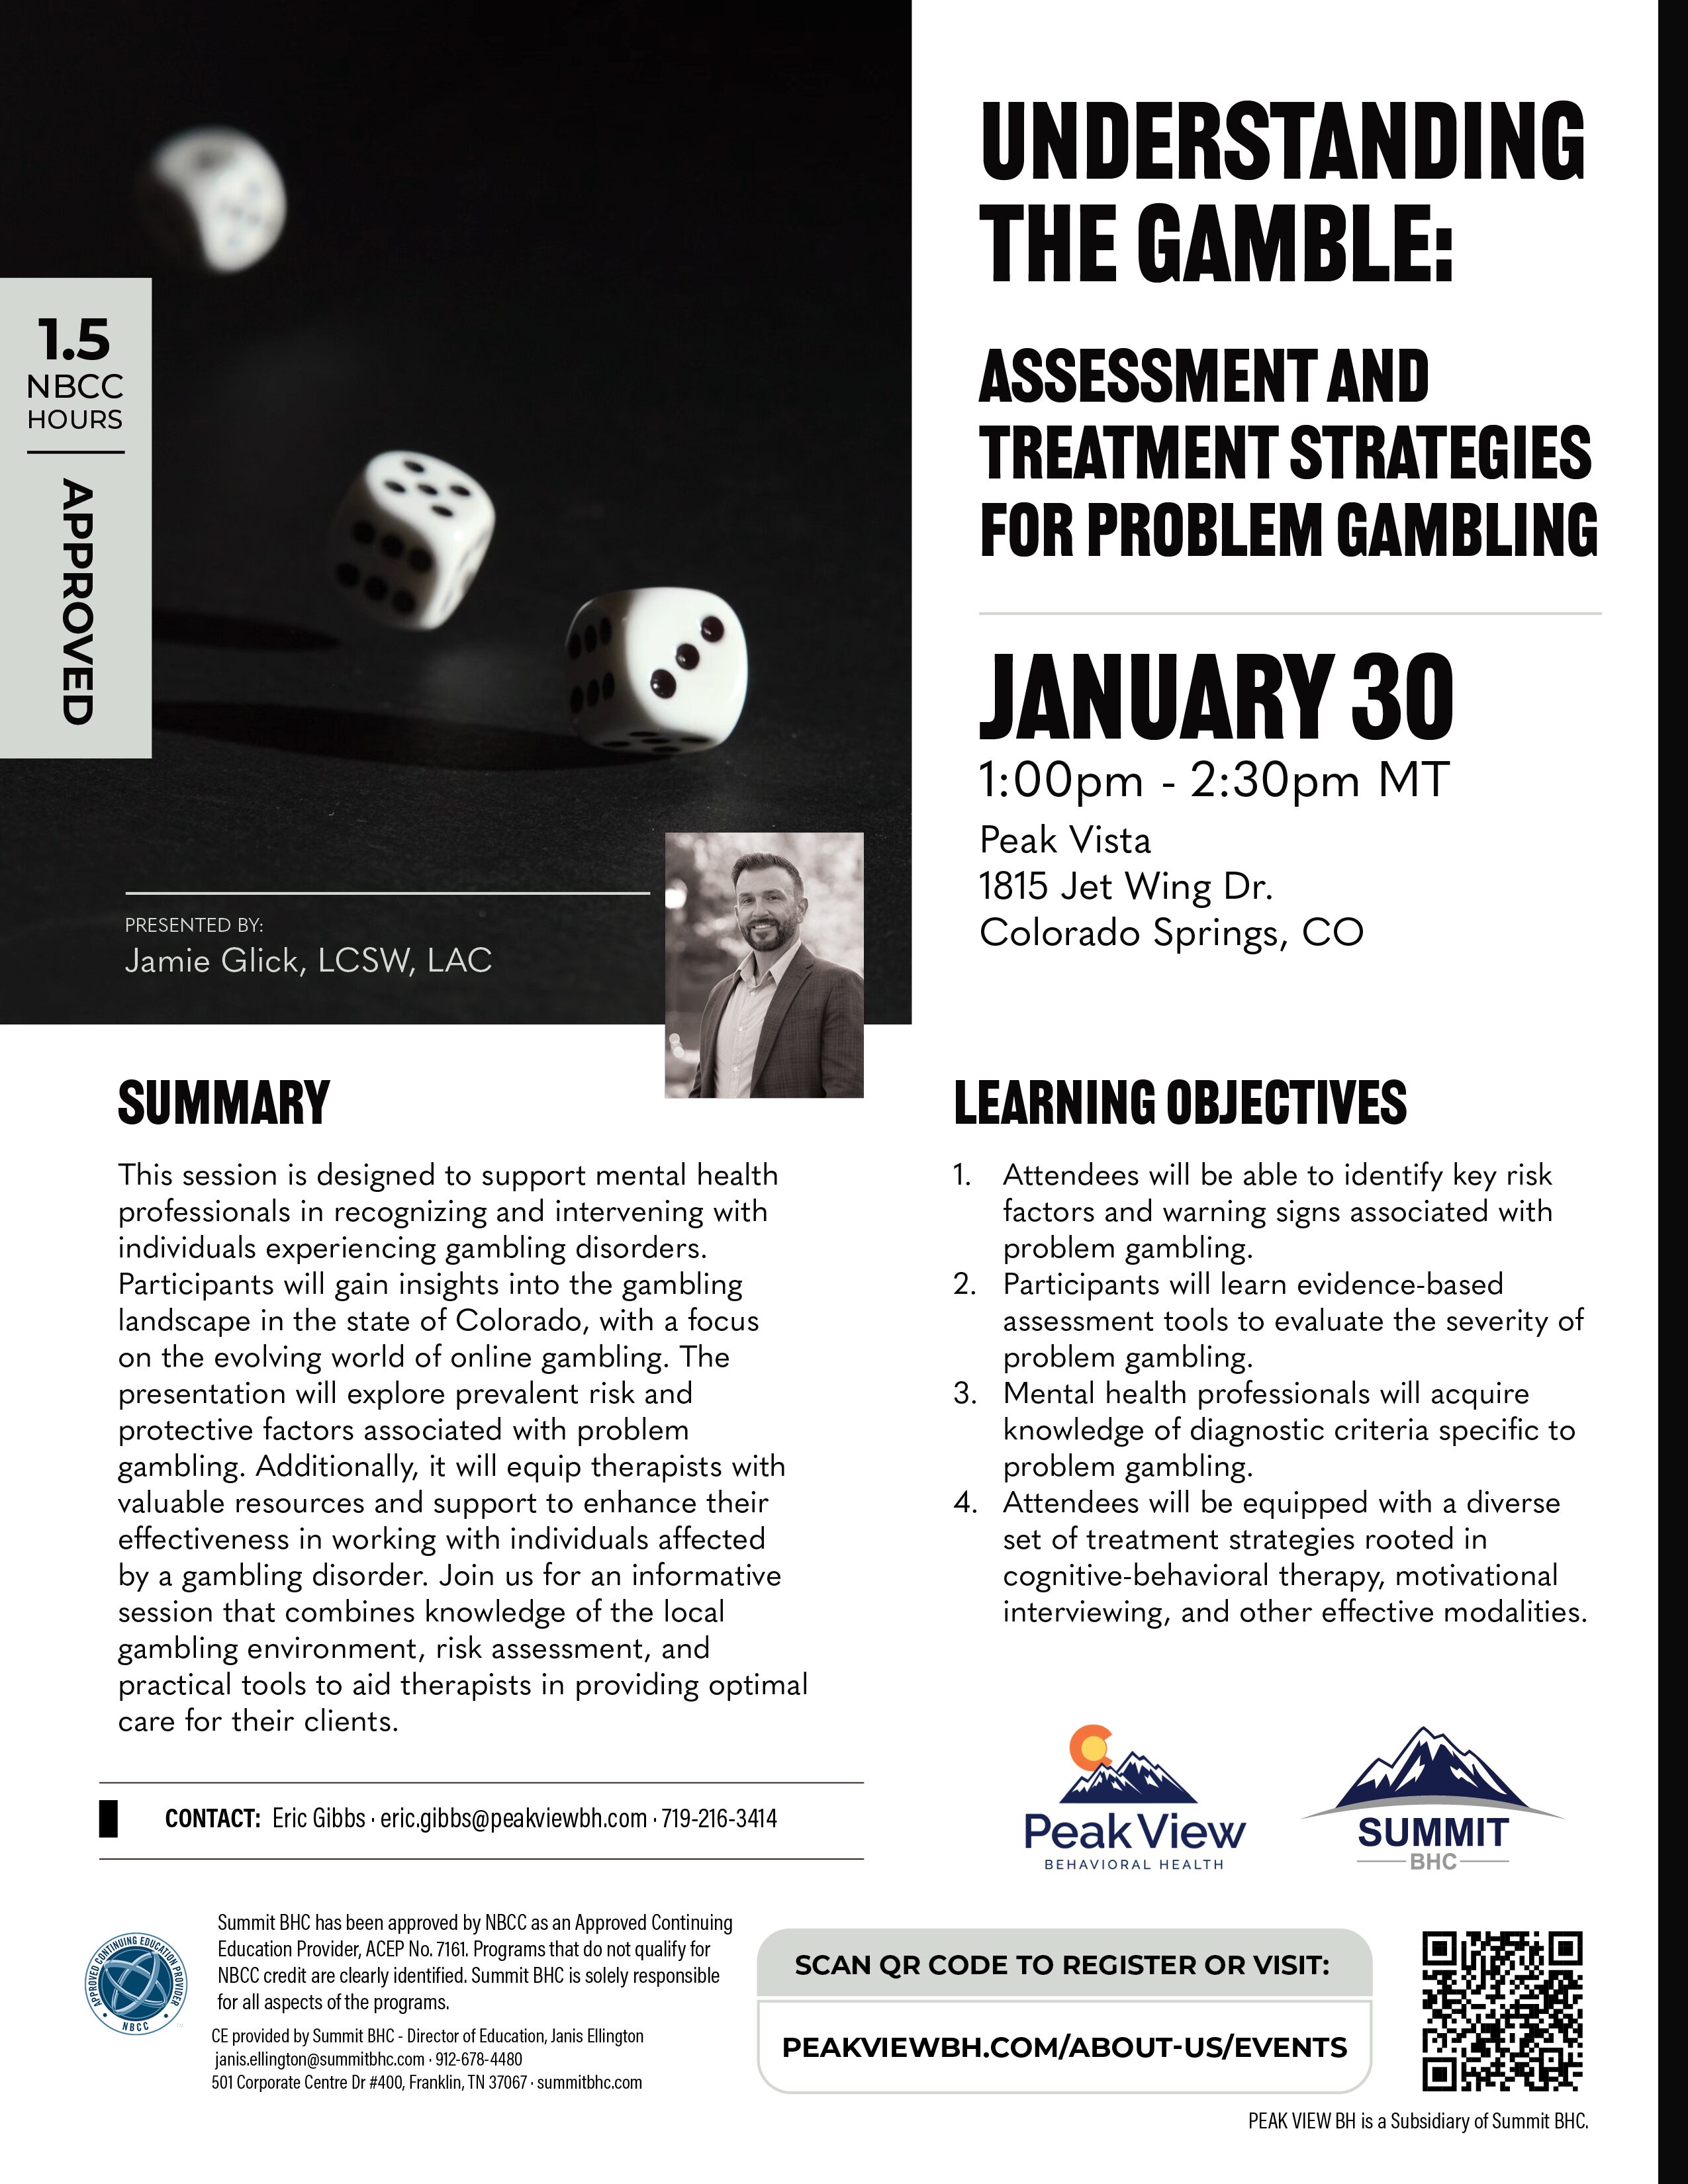 Understanding the Gamble: Assessment and Treatment Strategies for Problem Gambling, This session is designed to support mental health professionals in recognizing and intervening with individuals experiencing gambling disorders.